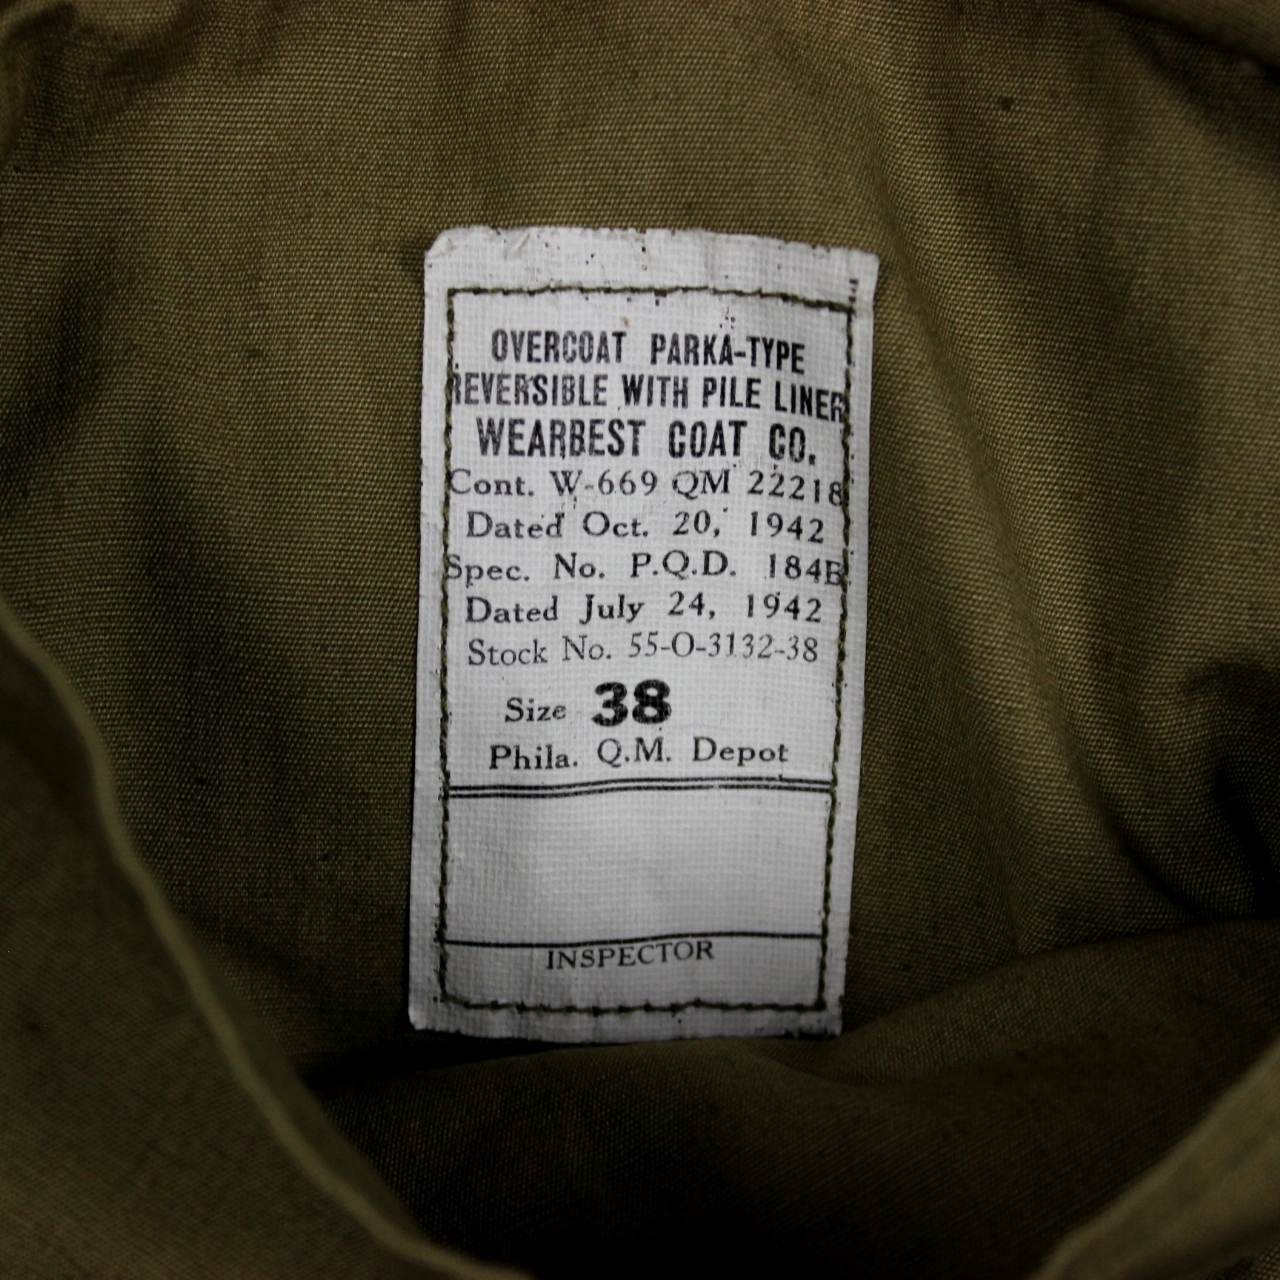 44th Collectors Avenue - US Army reversible ski parka w/ pile liner ...